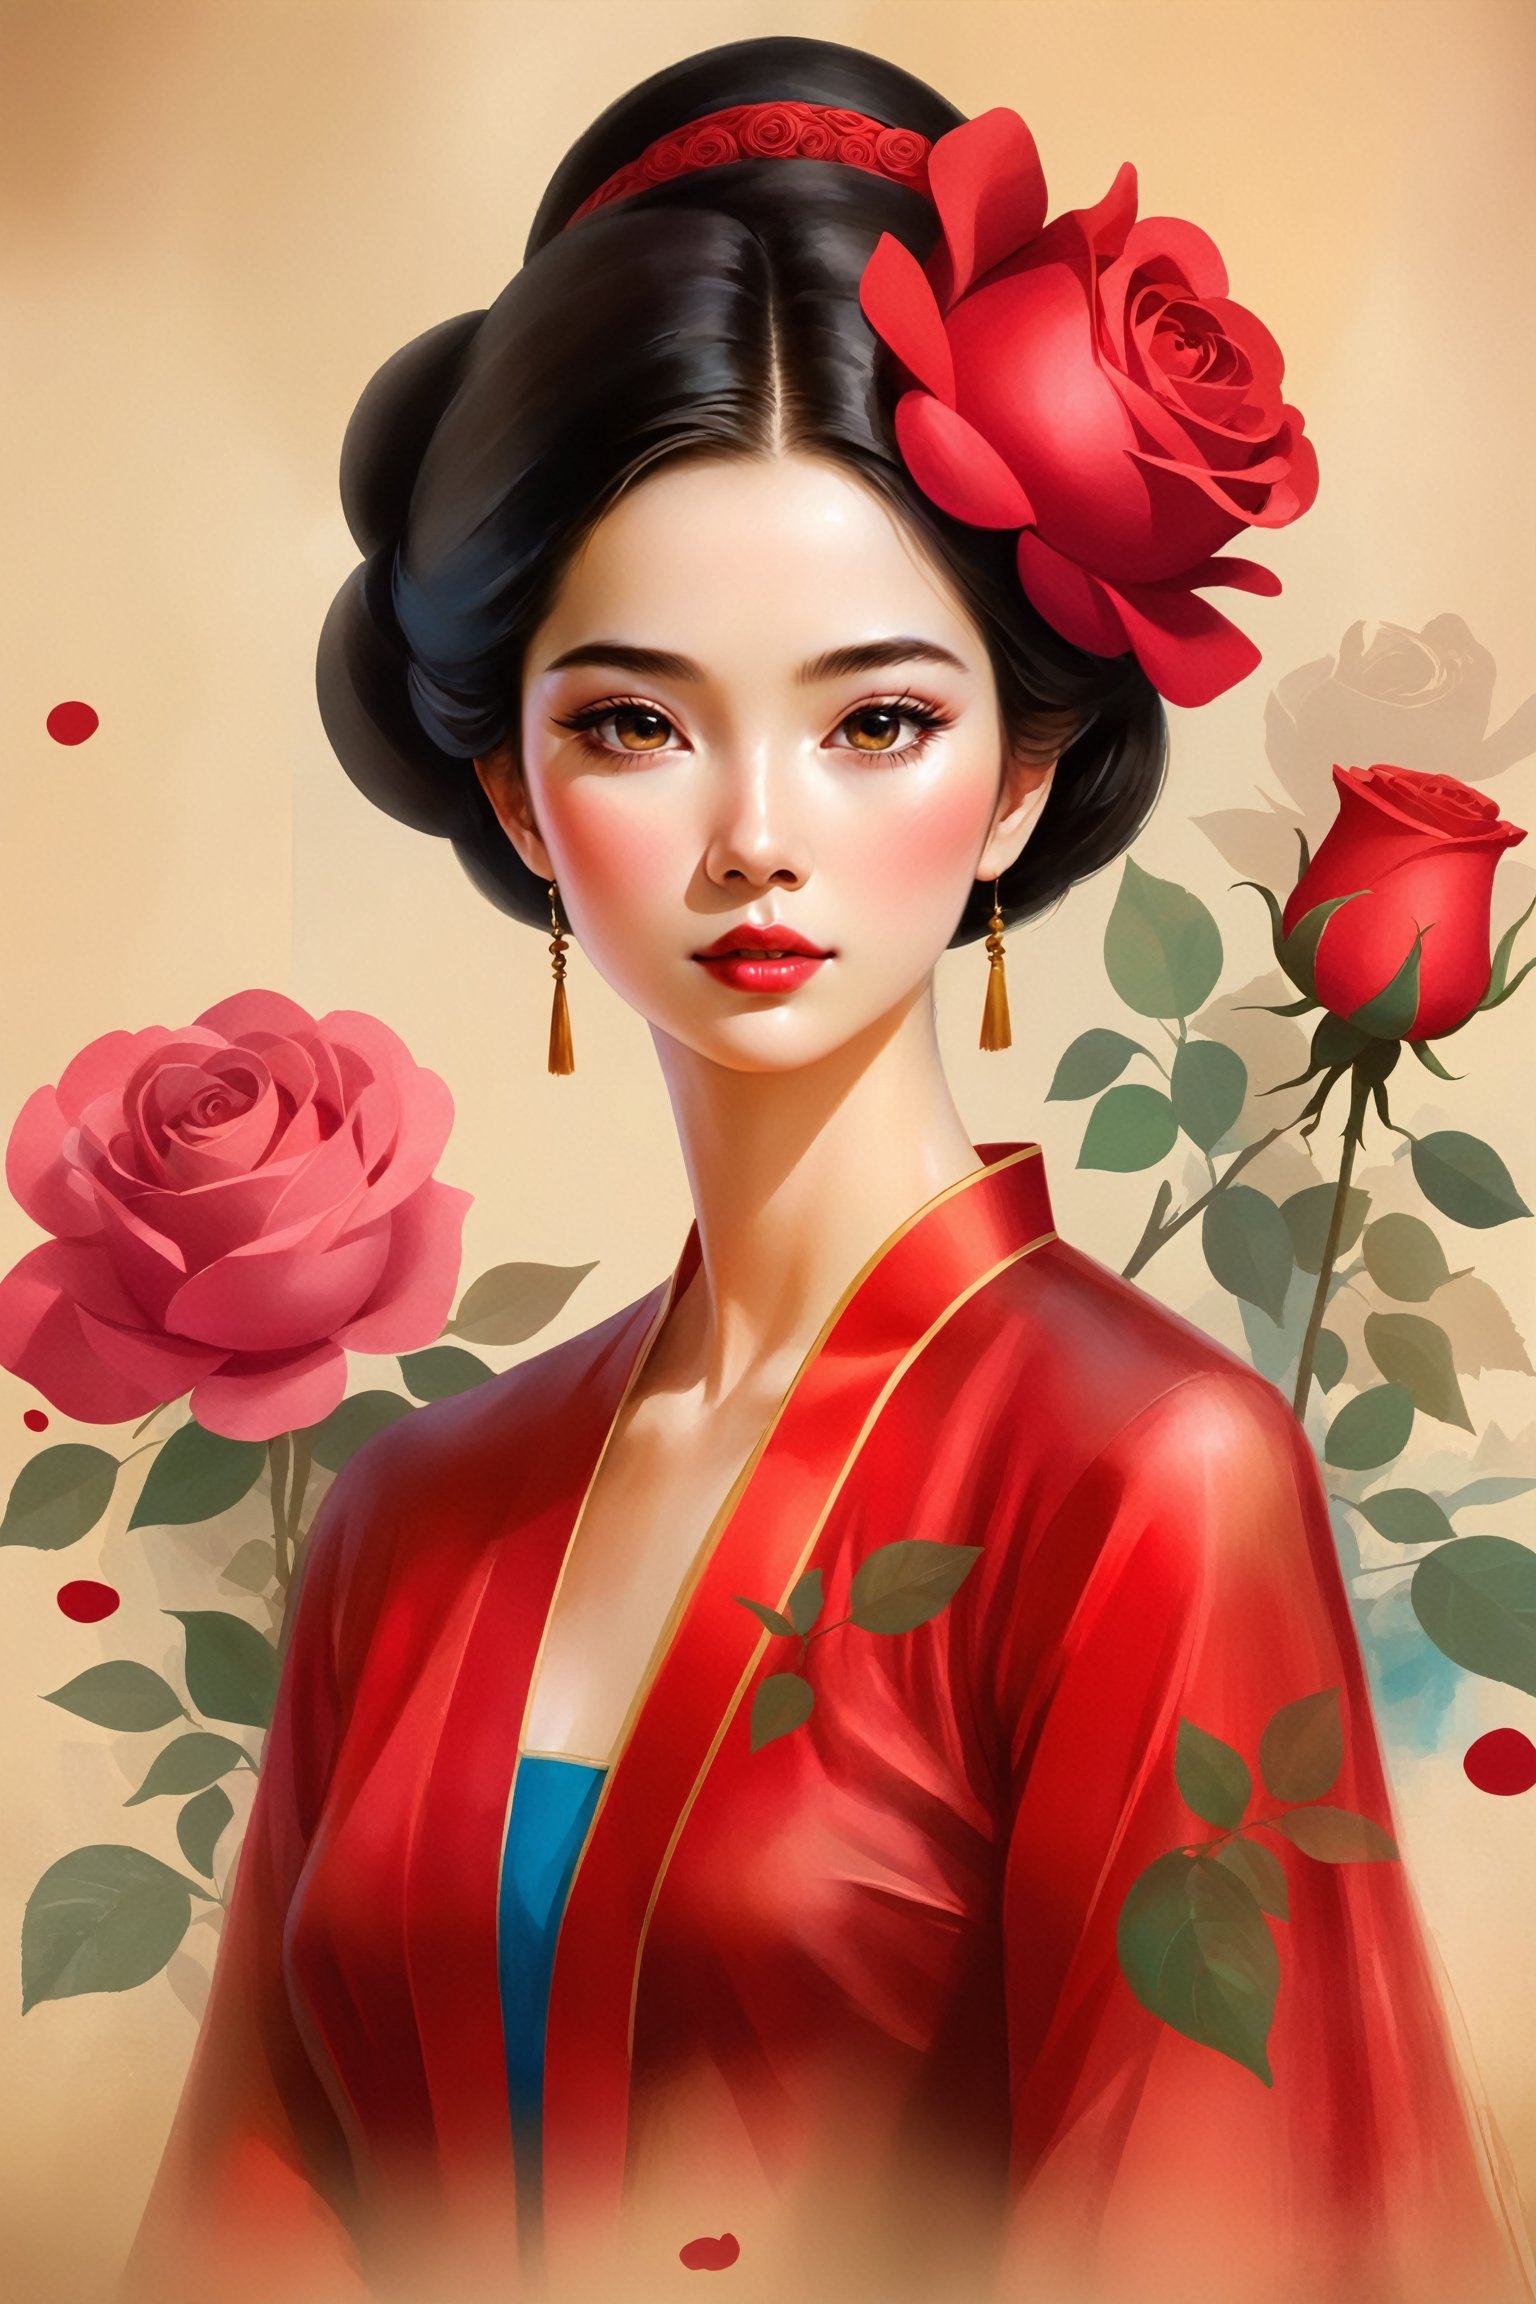 Create a modern-styled sketch portrait in silk textured old paper of a gentle lady inspired by roses and love, utilizing the vibrant color palettes and sleek lines reminiscent of the works by Chinese contemporary artist Zhang Xiaogang, background is full of roses abstract and bloody illustrations abstracts,chinese_painting,Vietgirl